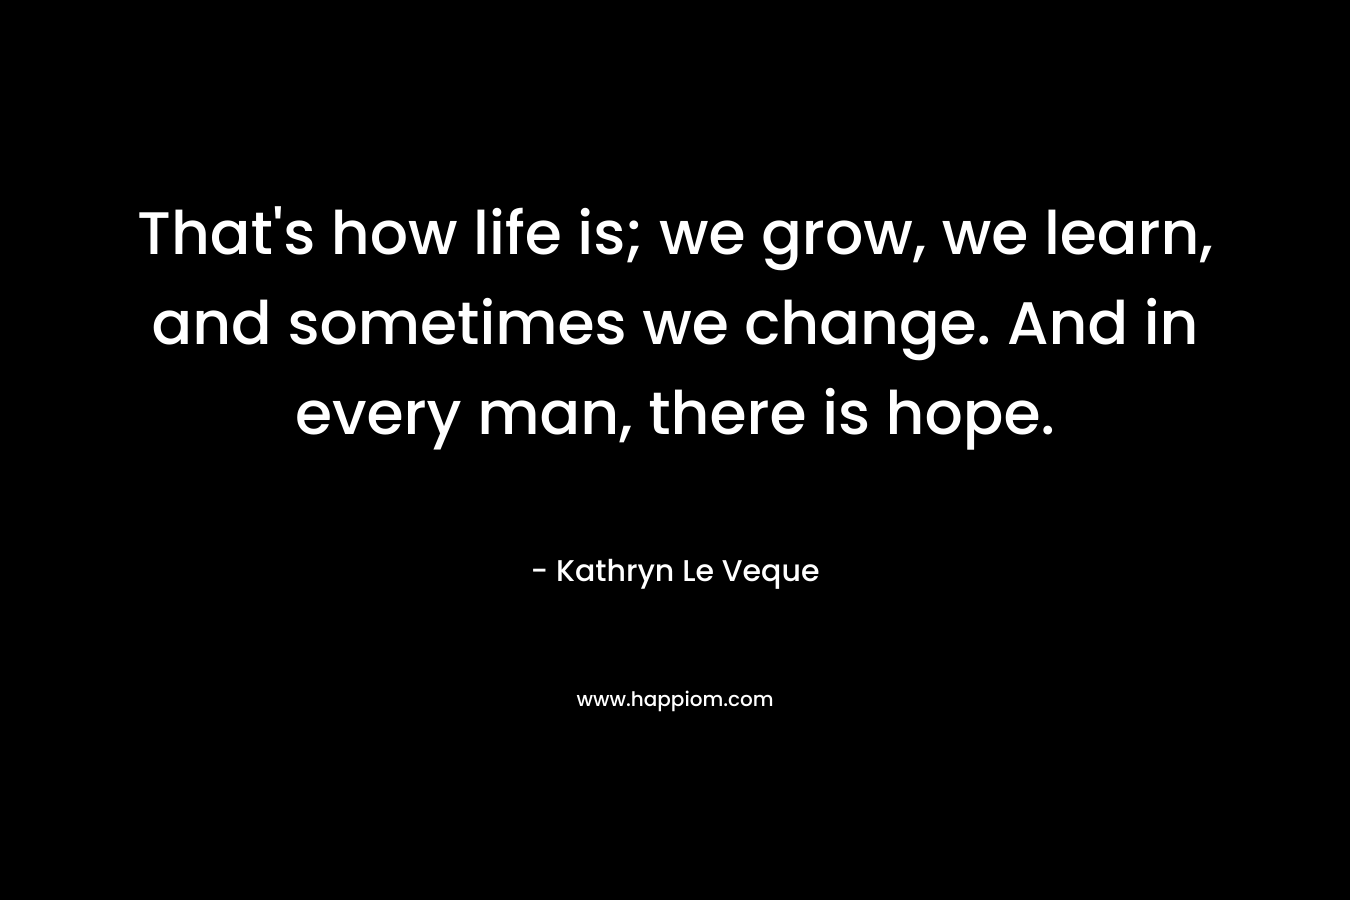 That’s how life is; we grow, we learn, and sometimes we change. And in every man, there is hope. – Kathryn Le Veque